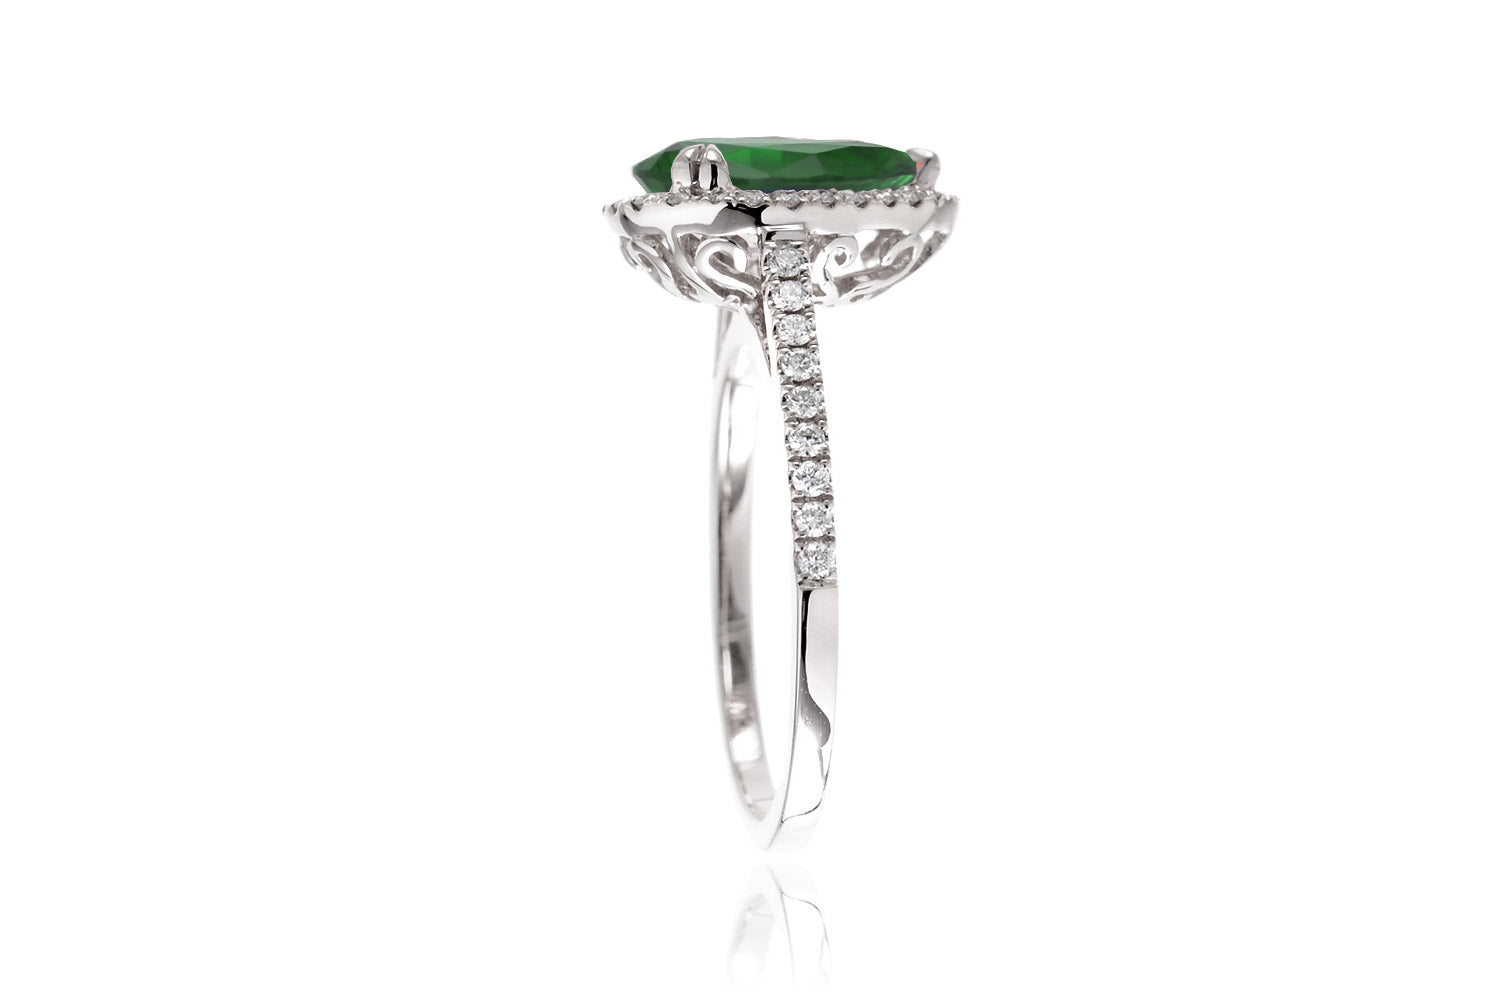 Pear green emerald diamond halo cathedral engagement ring white gold - The Signature